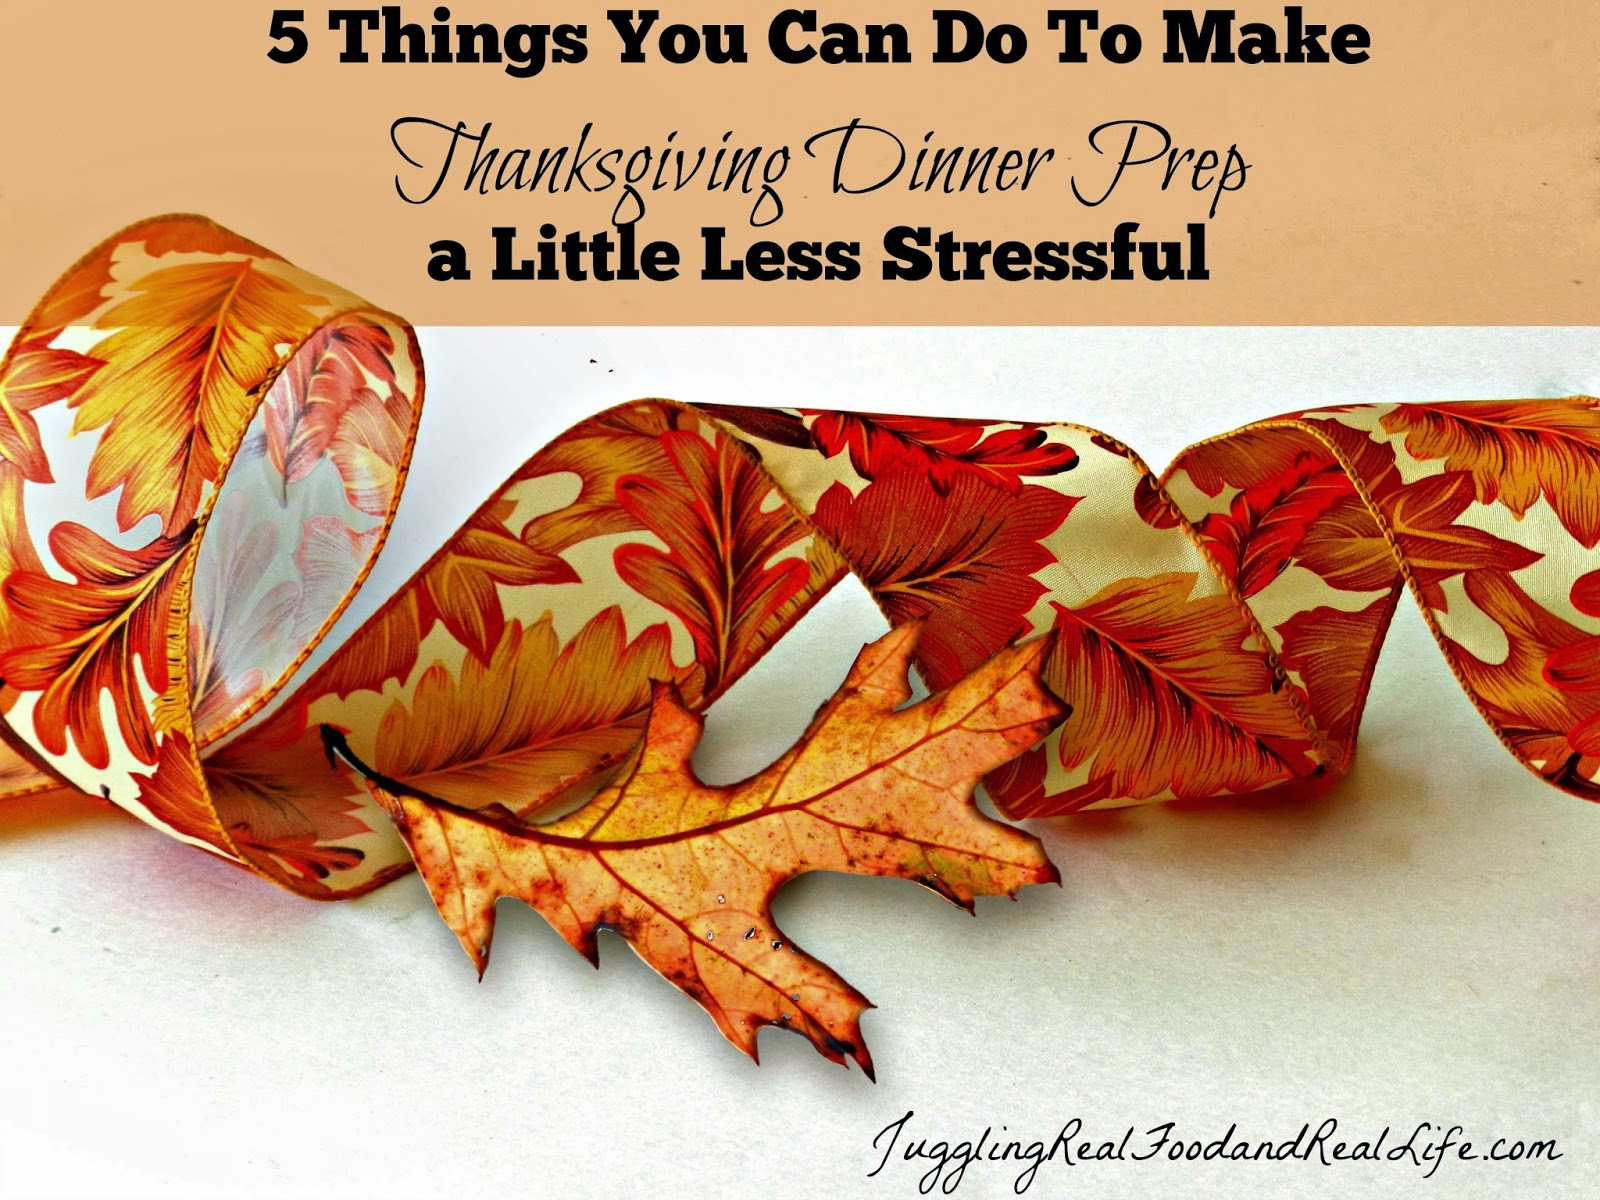 5 Things You Can Do To Make Thanksgiving Dinner Prep A Little Less Stressful + 2 Bonus Tips